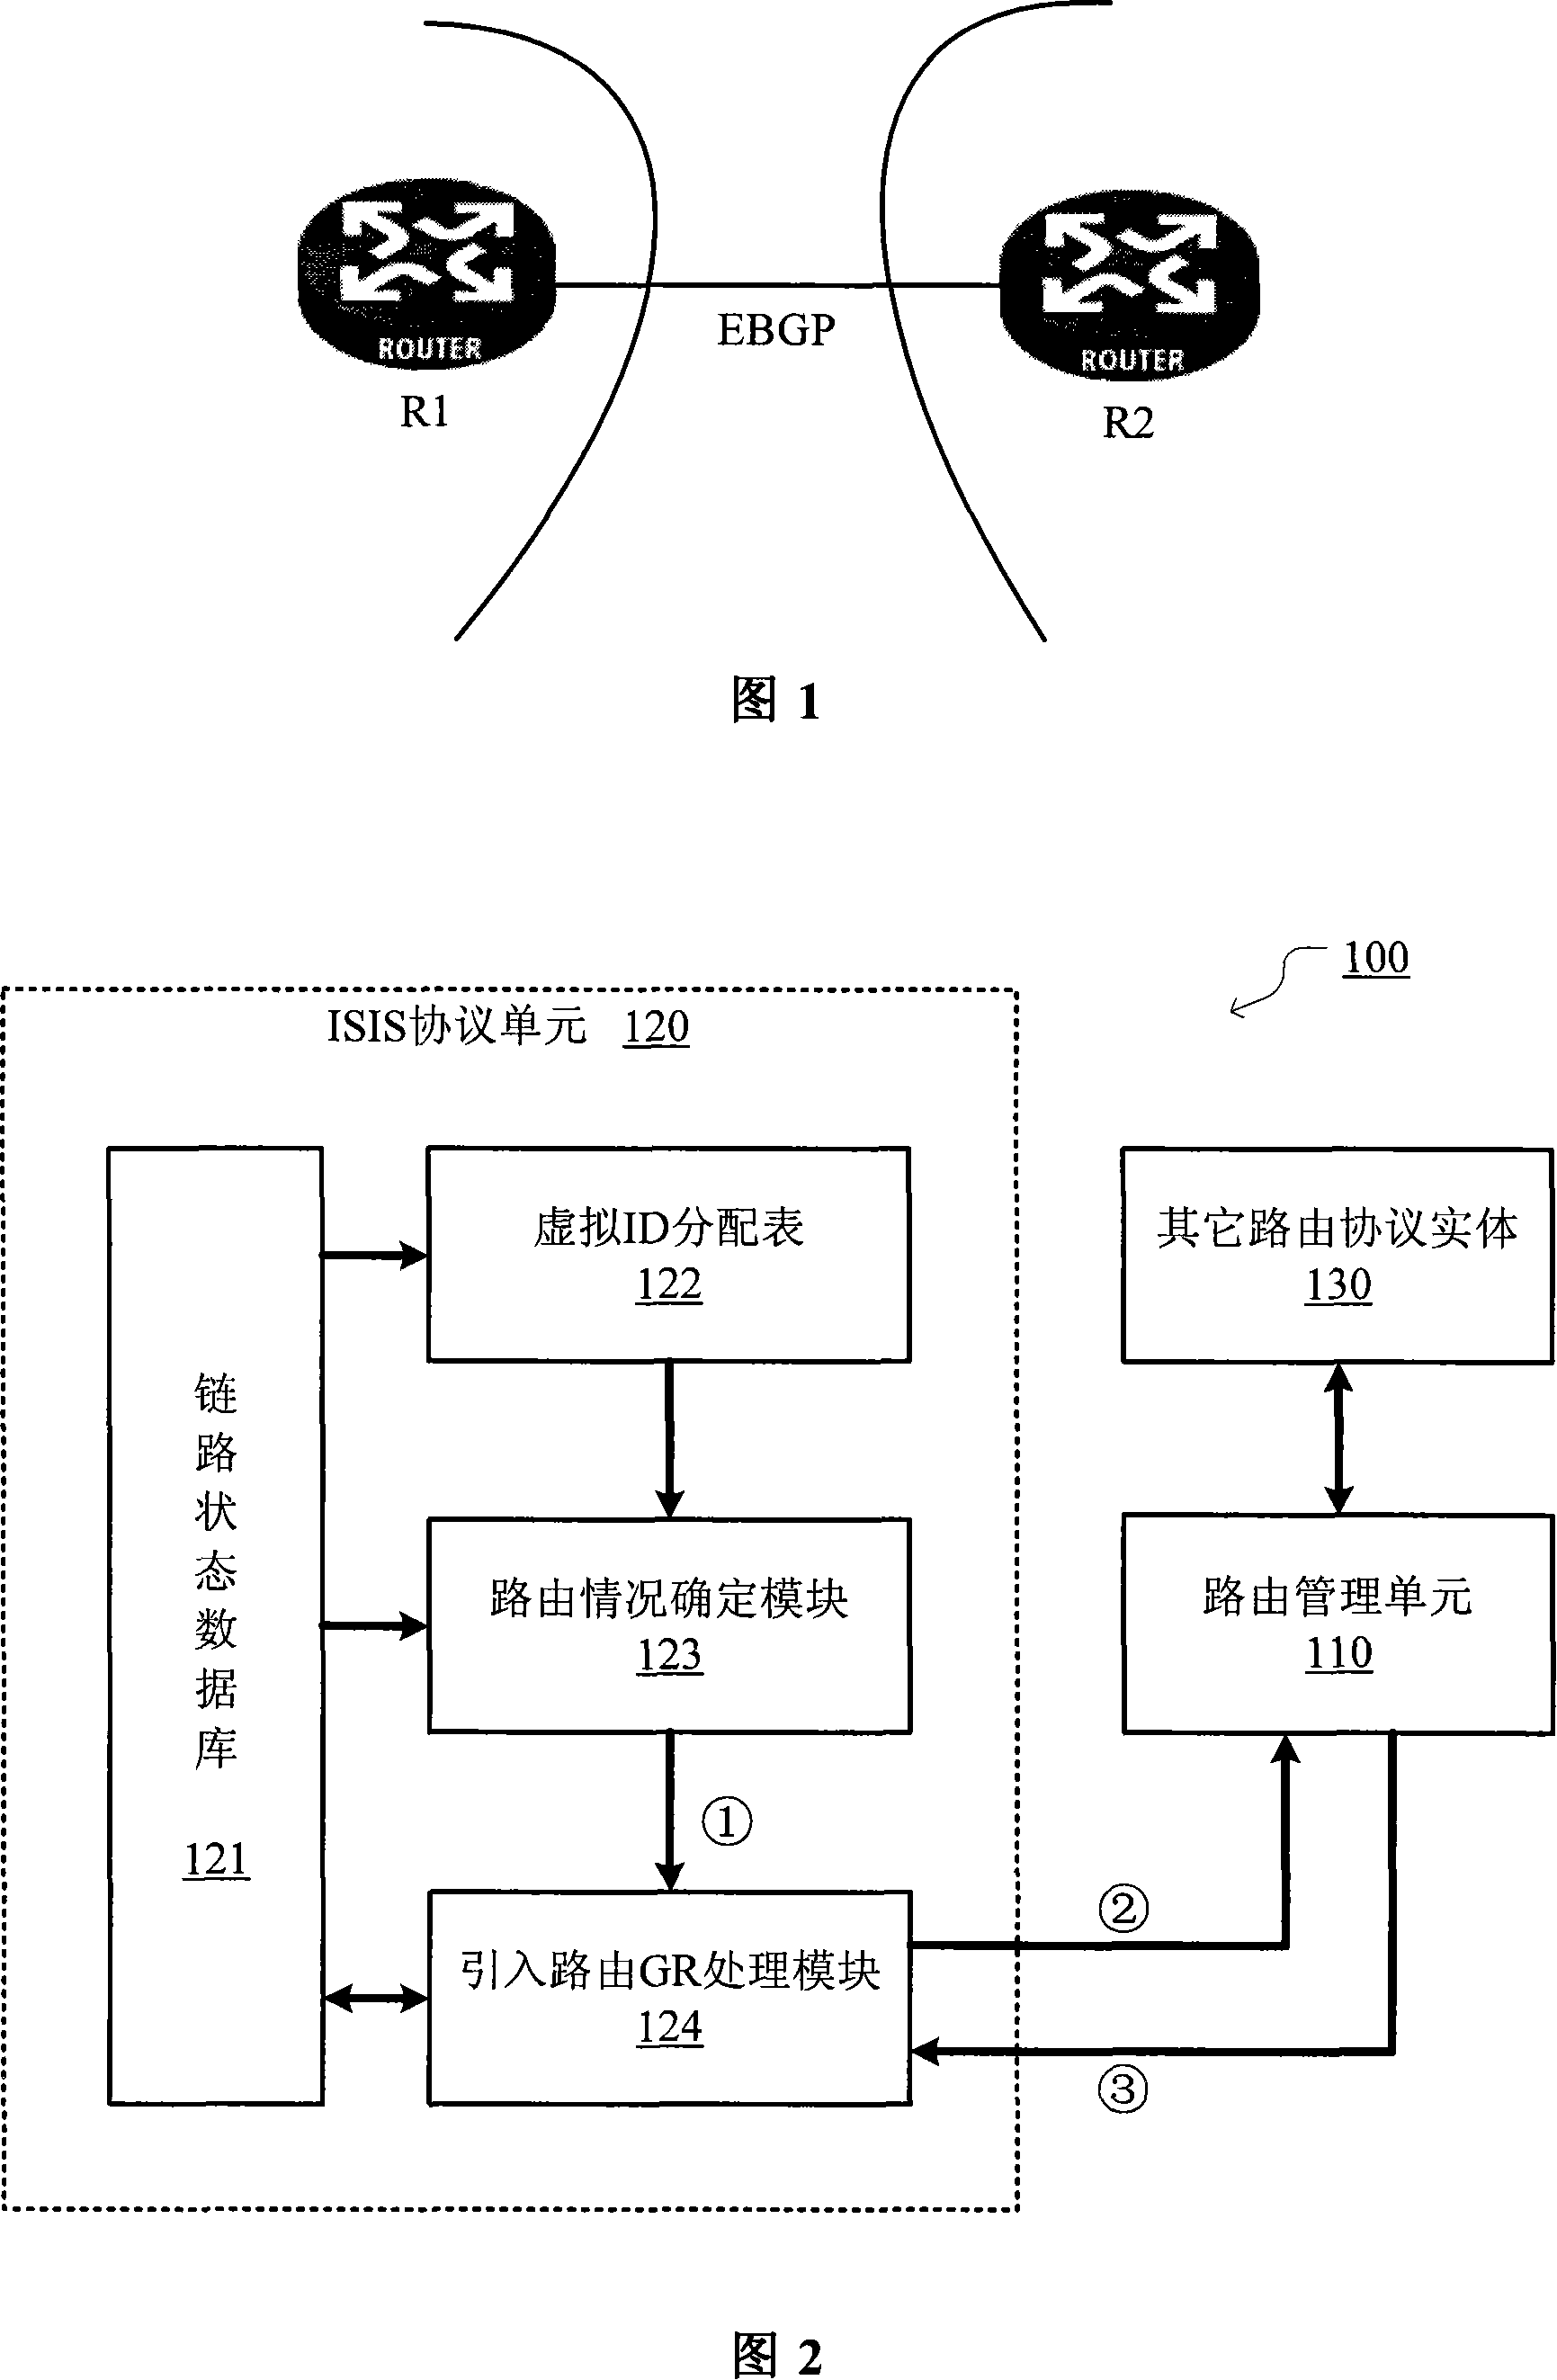 Routing device and its grace ful restart method